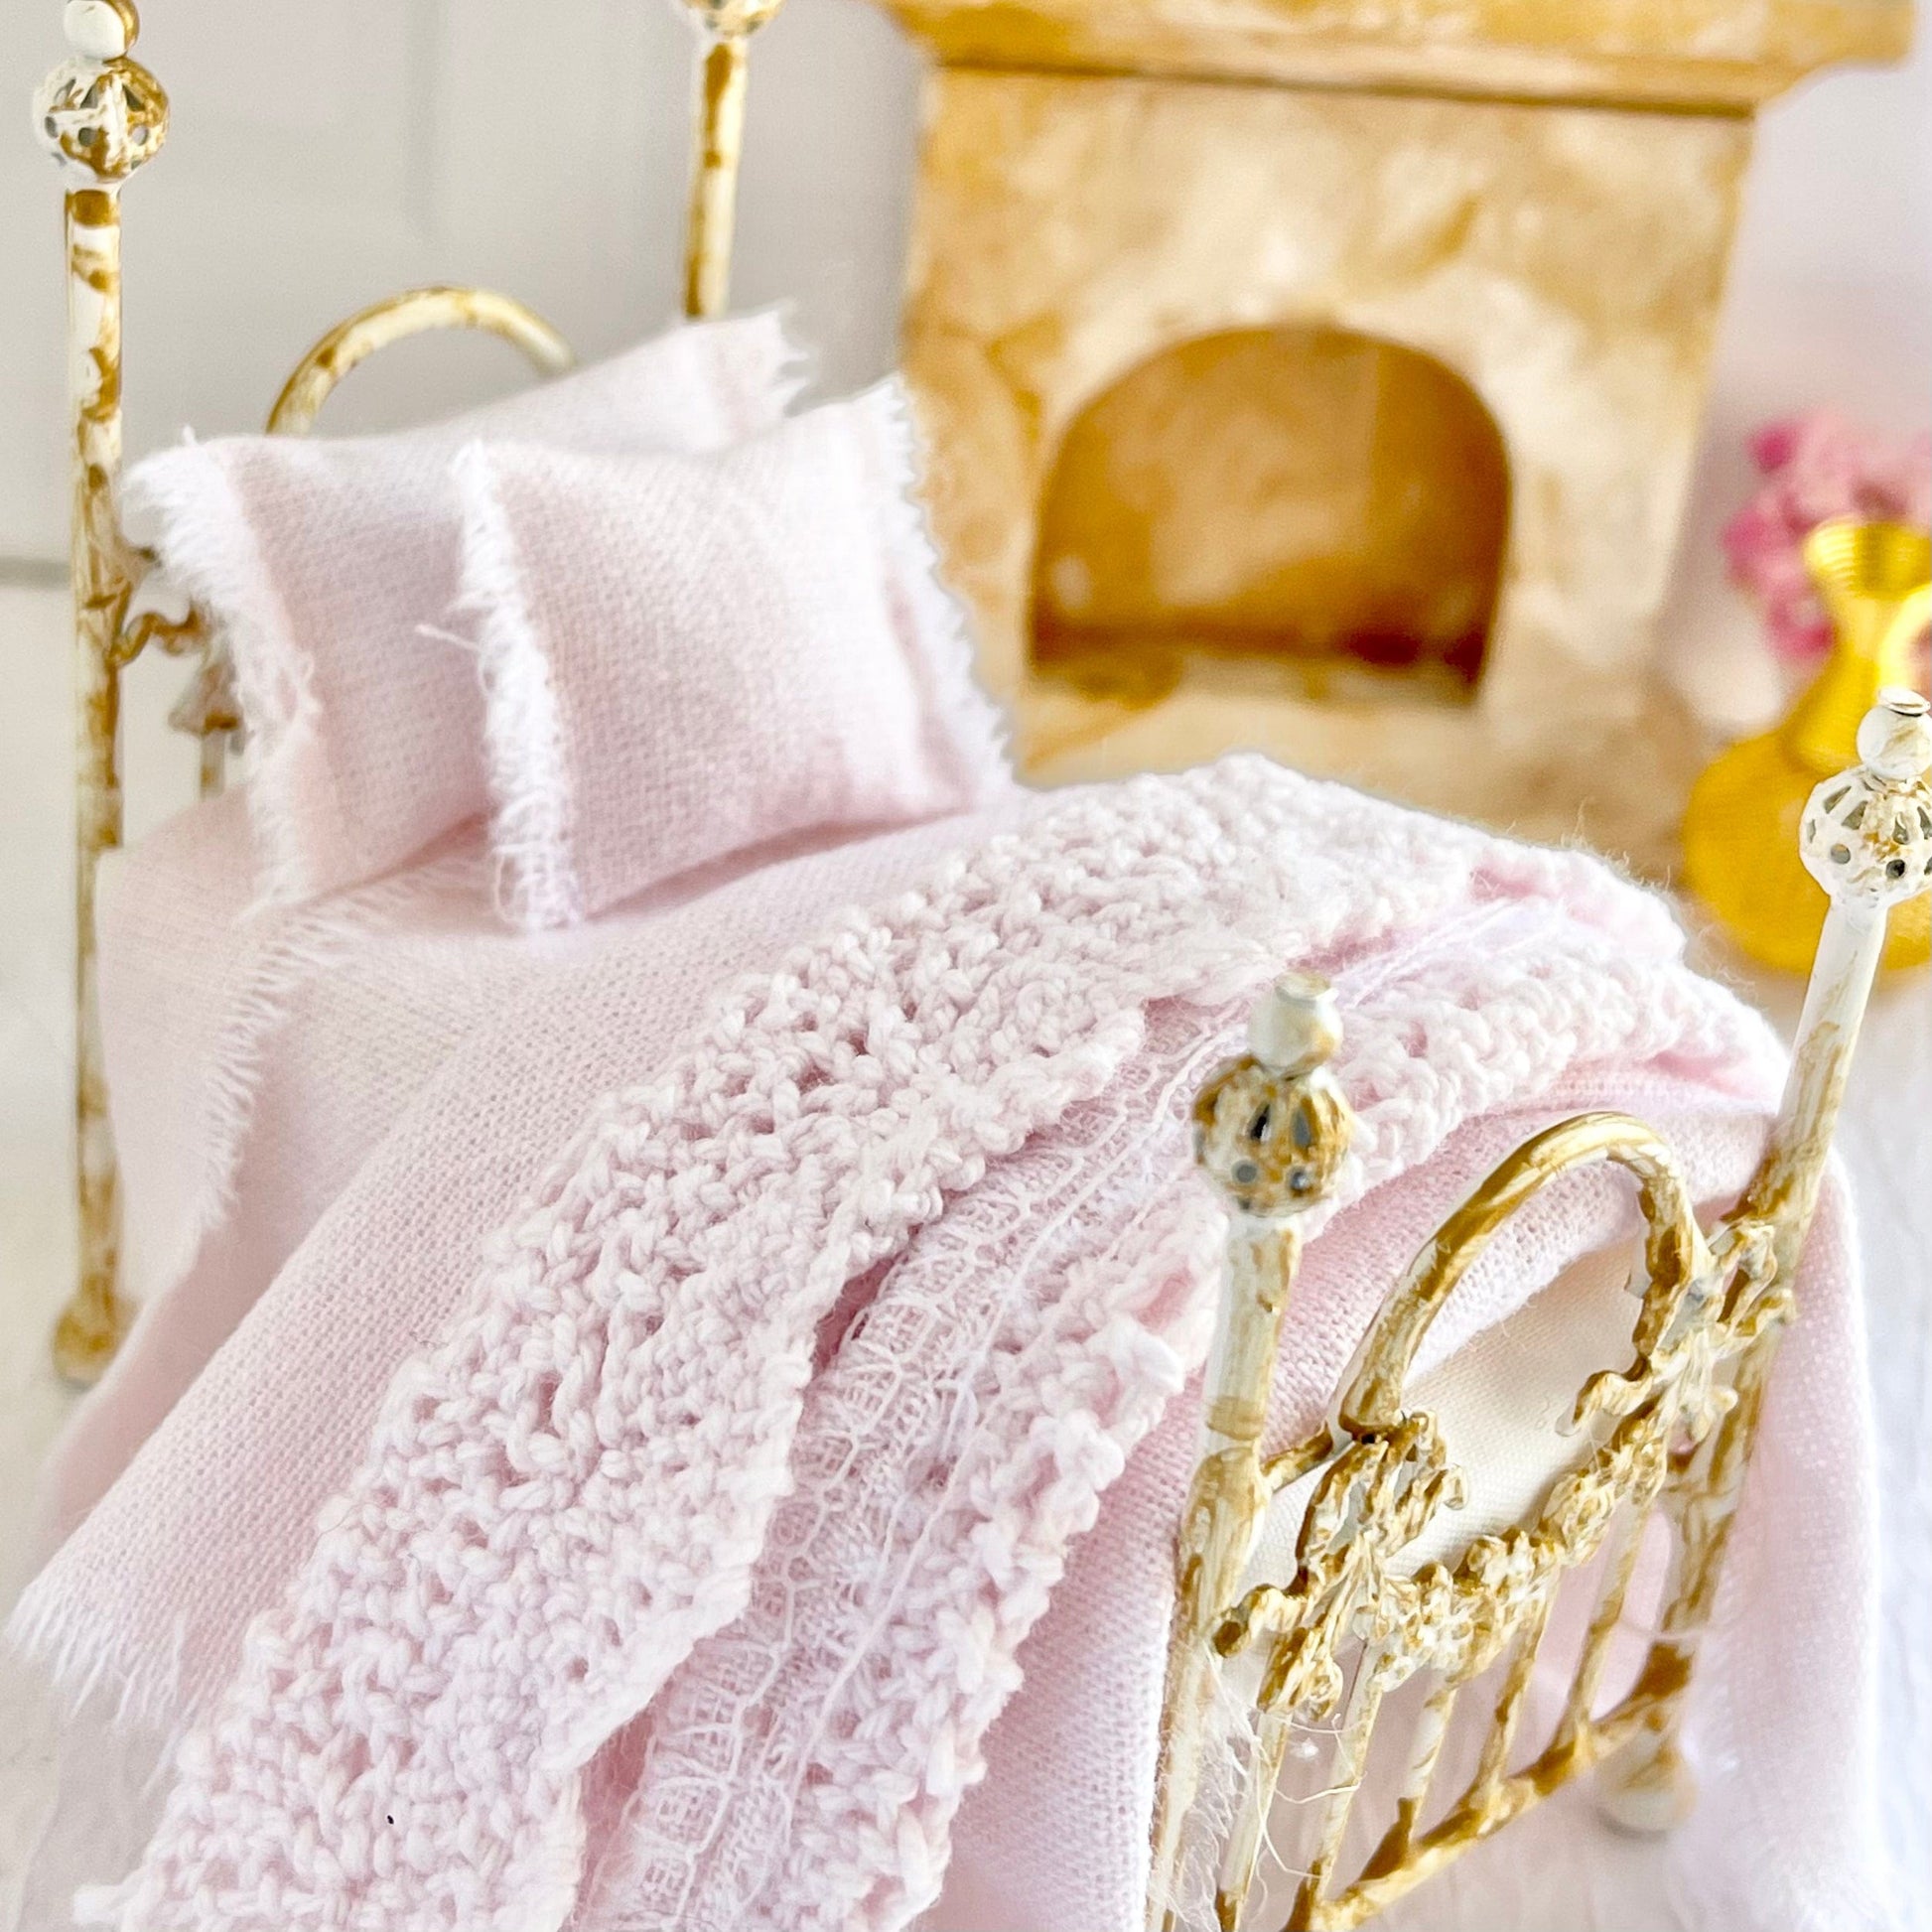 CHANTALLENA Dollhouse Accessories 1:24 Scale |  Six Piece Pink Linen Blend with Crocheted Throw Dollhouse Bedding Set | Petite Tedra